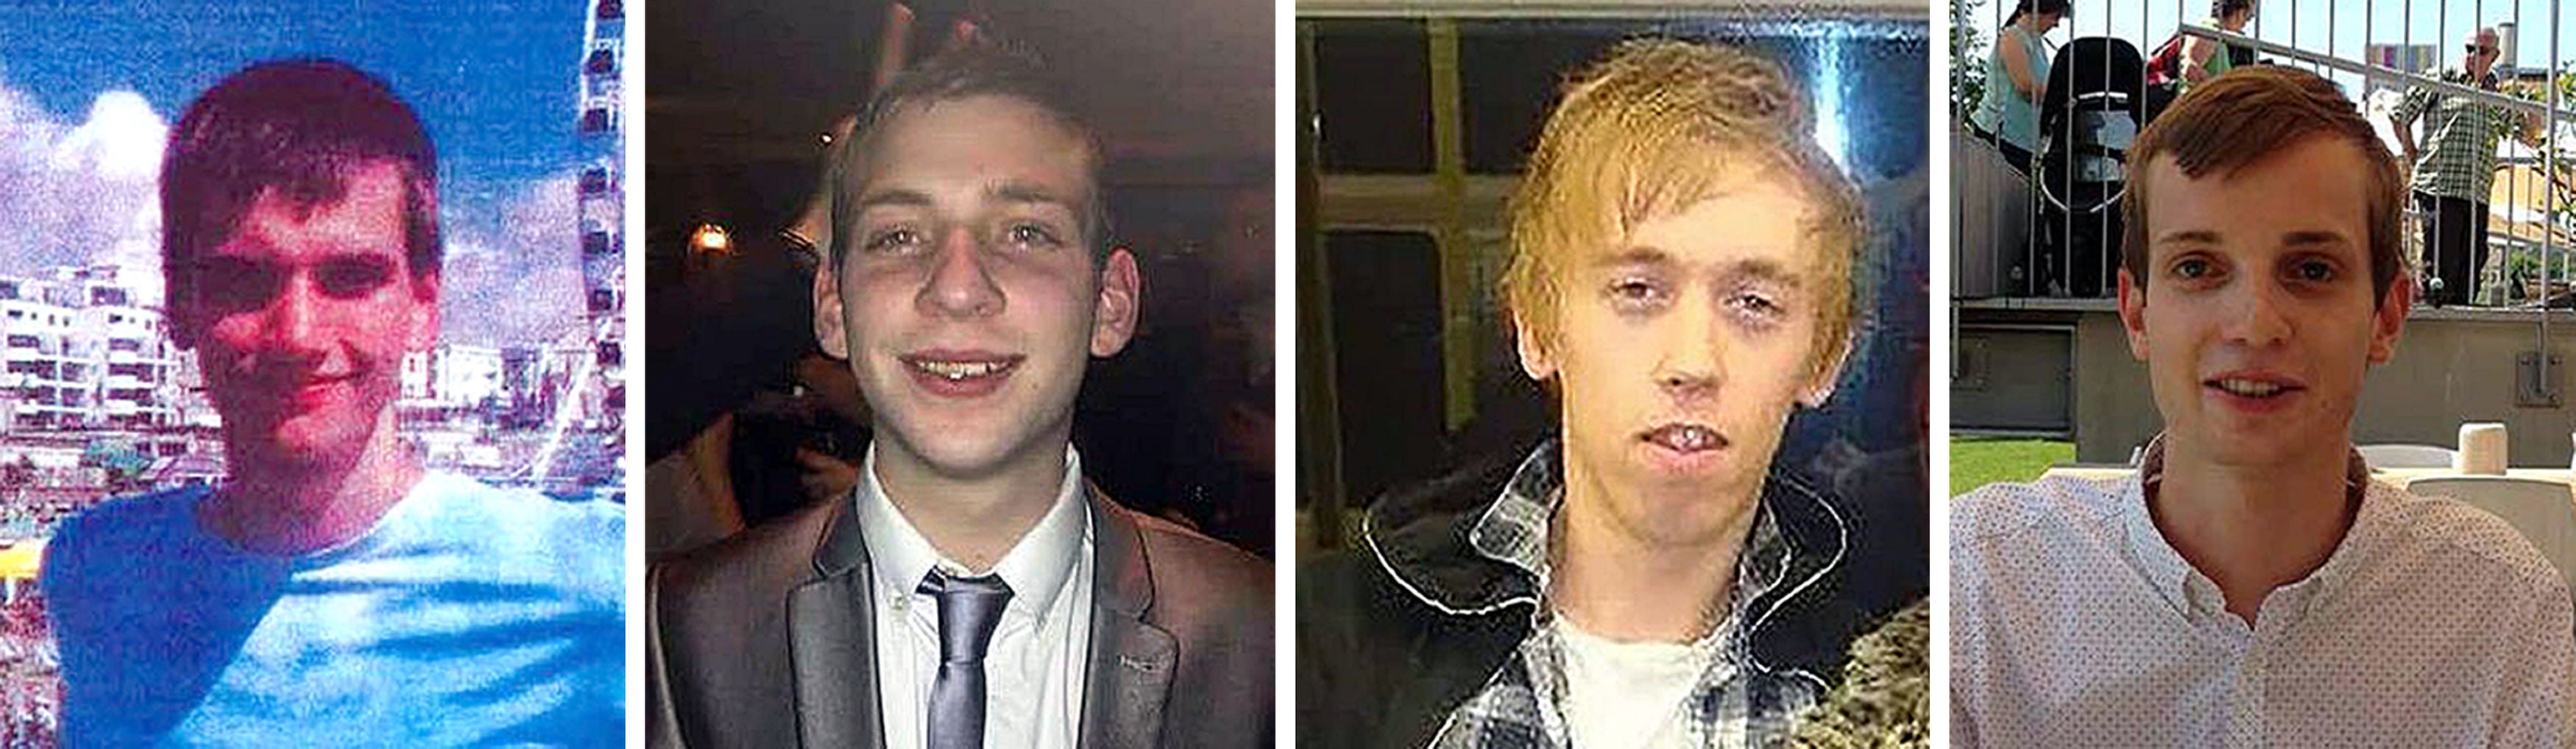 All of Stephen Port’s victims were gay, and their families questioned whether their sexuality affected police investigations